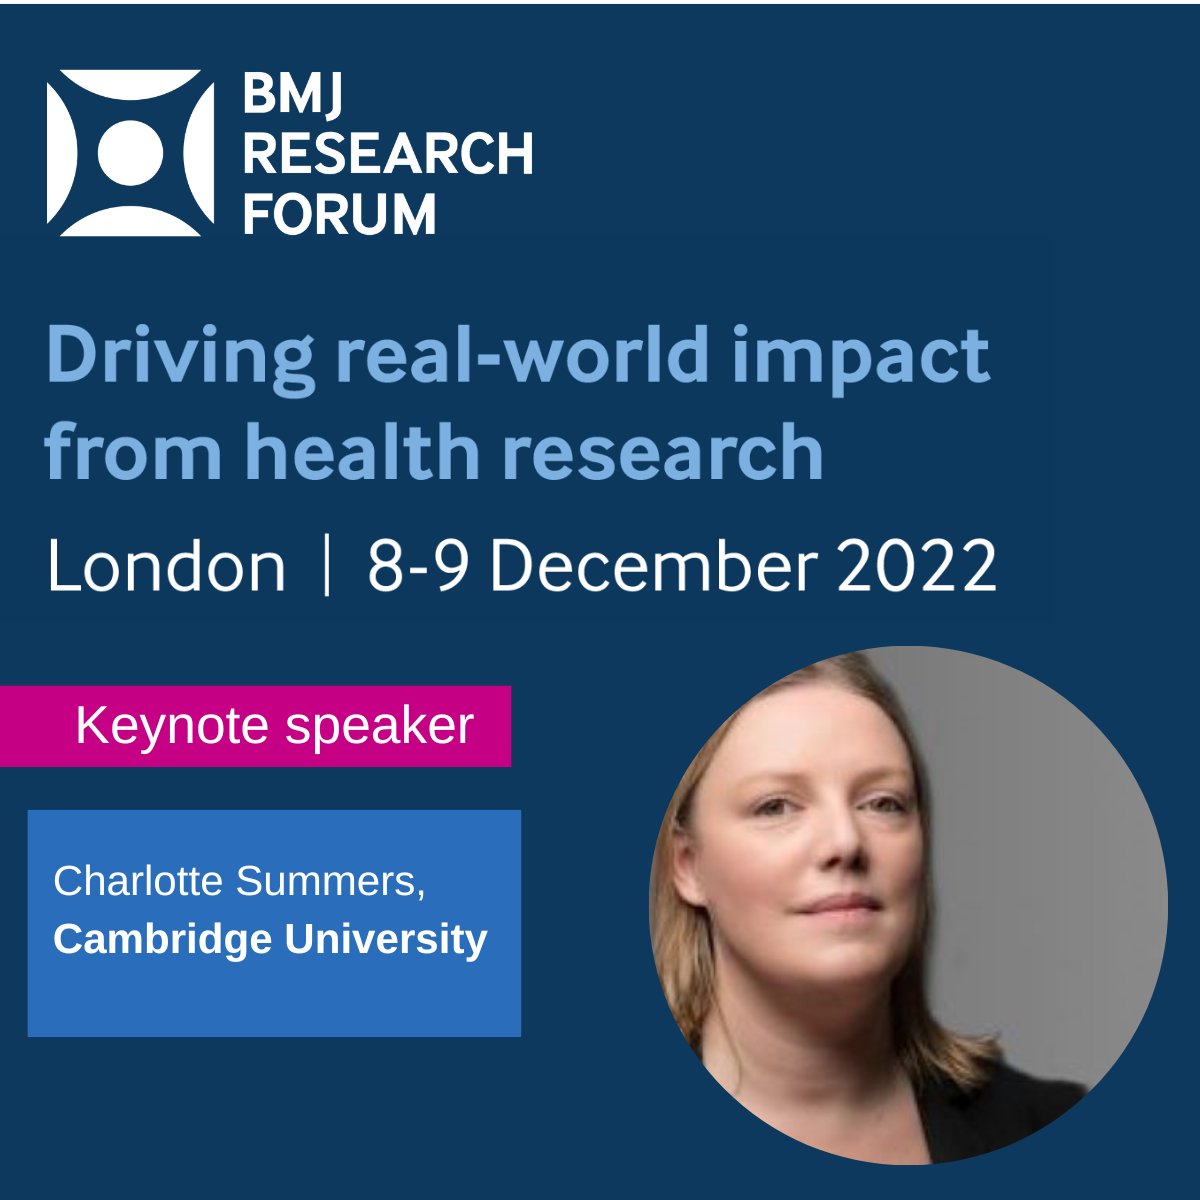 This Thursday, @bmj_company Research Forum discusses technology driving health research with @elinhafdavies from @aparitohealth & @charlot_summers from @Cambridge_Uni discussing innovative #digitaltools! 

Register here! bmjresearchforum.bmj.com/registration/ 

#BMJRF 
#digitalhealth